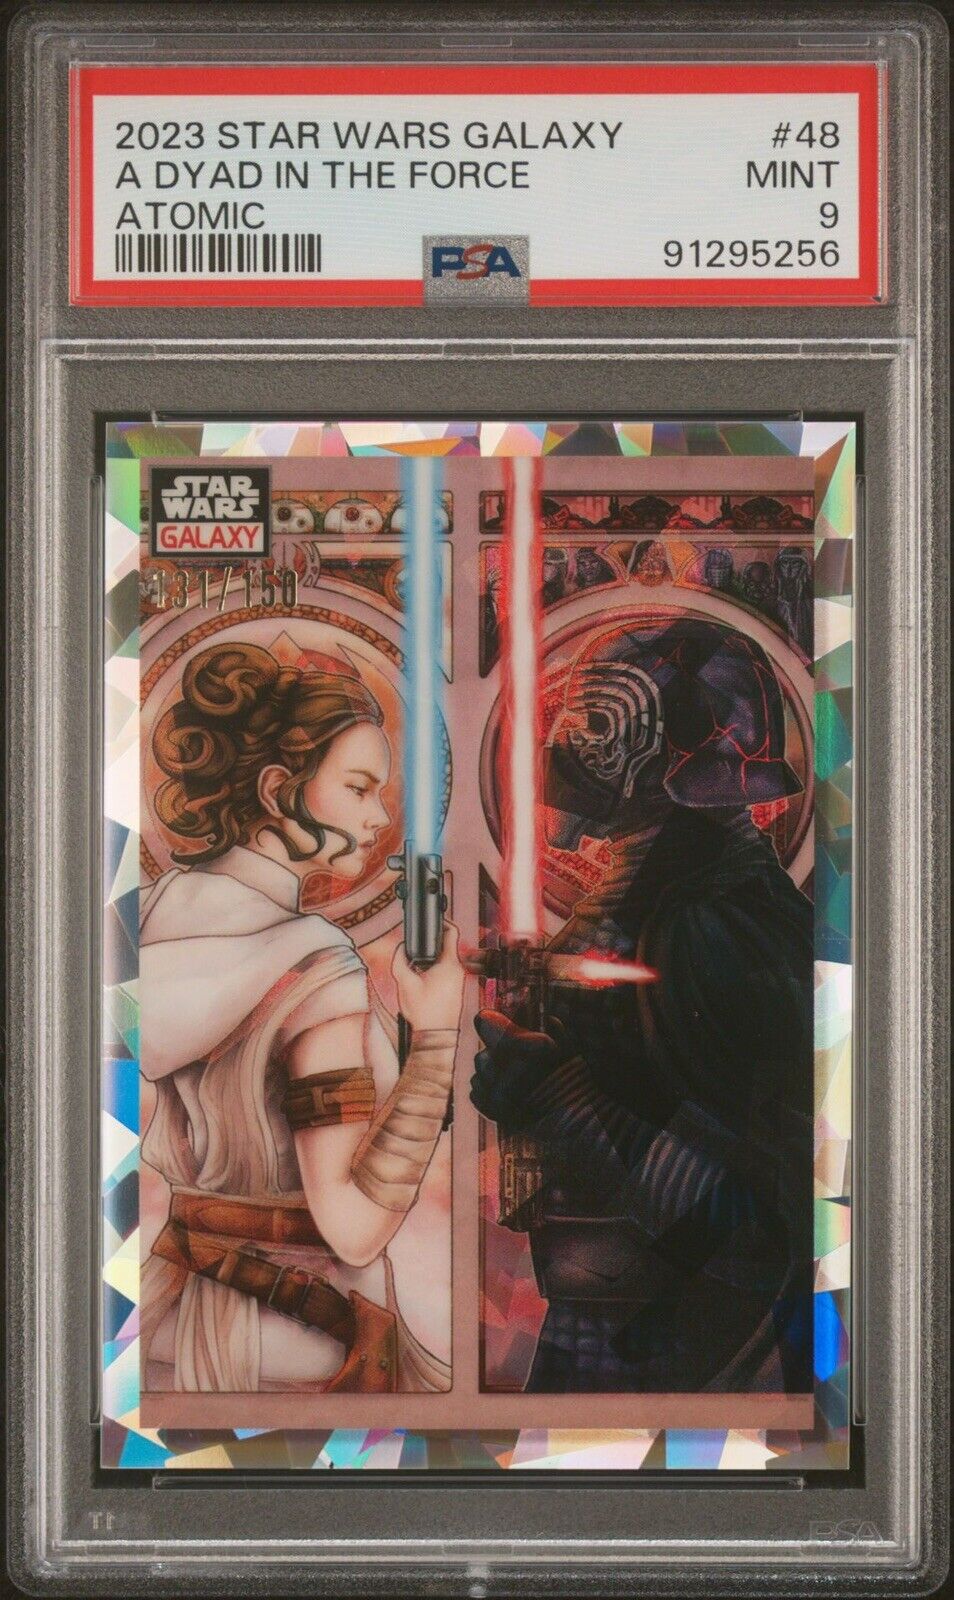 2023 Topps Star Wars Galaxy A Dyad In the Force ATOMIC PSA 9 💎